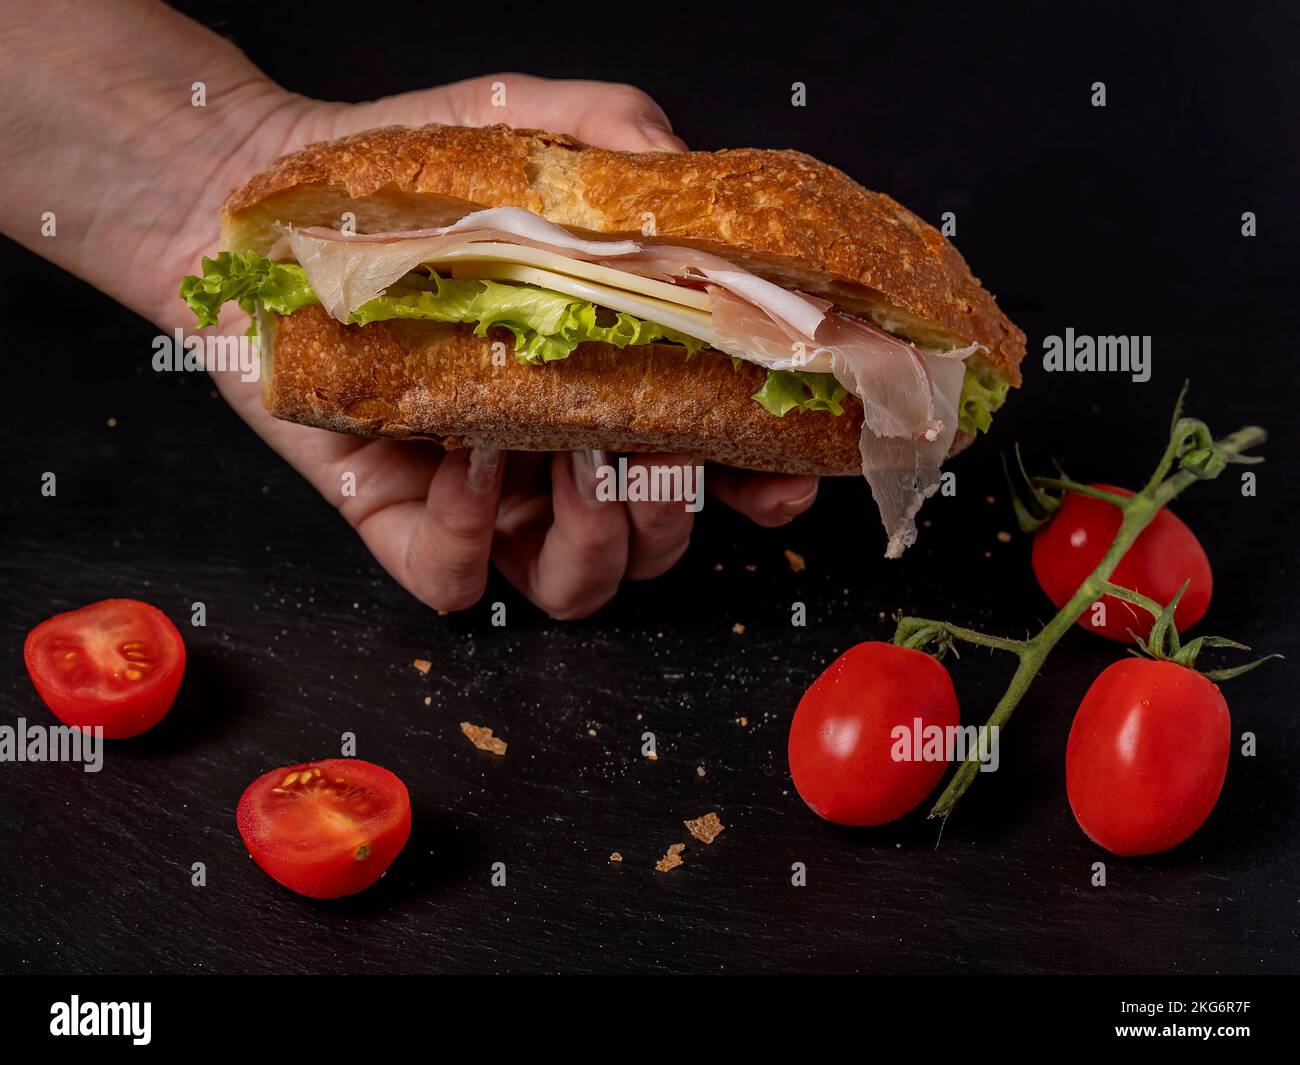 A female hand holds a sandwich filled with cheese, salad and smoked speck ham, on a black background with red cherry tomatoes Stock Photo